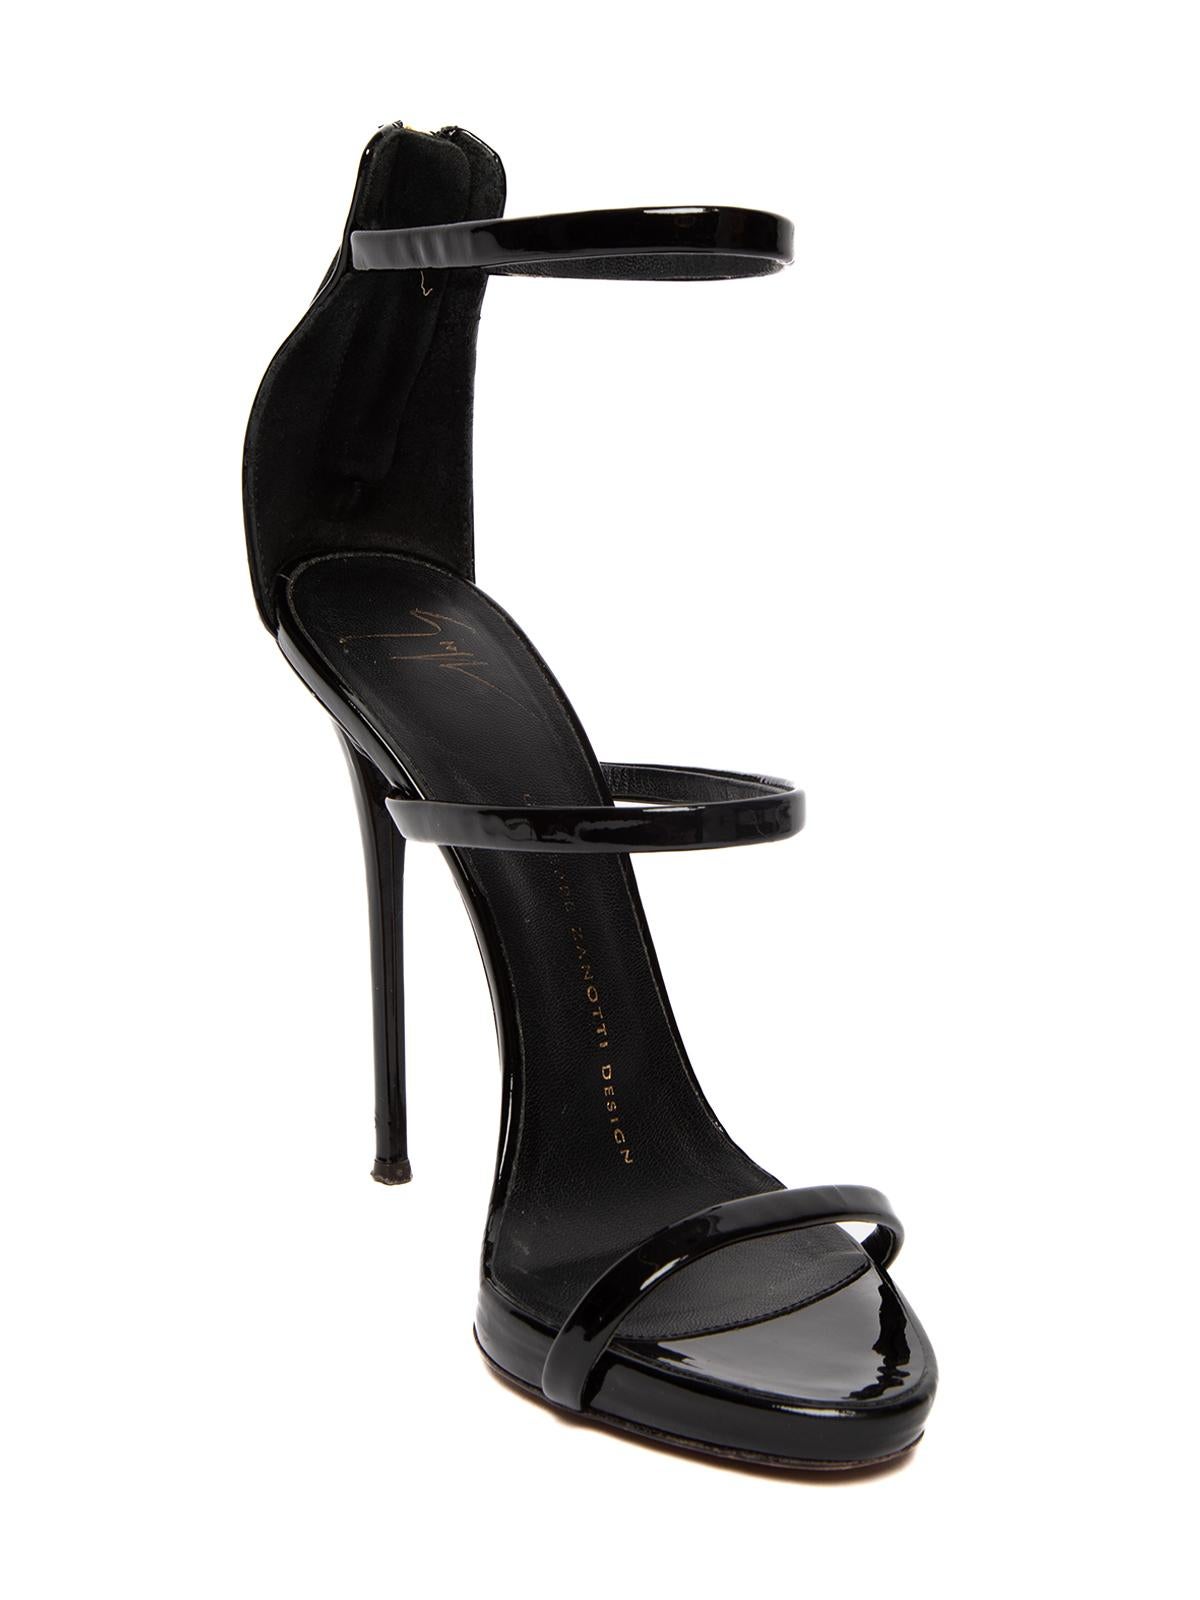 CONDITION is Good. Some wear to heels is evident. Worn out outersole and discoloration to suede on this used Giuseppe Zanotti designer resale item. Details Harmony collection Black Patent leather Strappy design Open toe Zip up fastening Stiletto